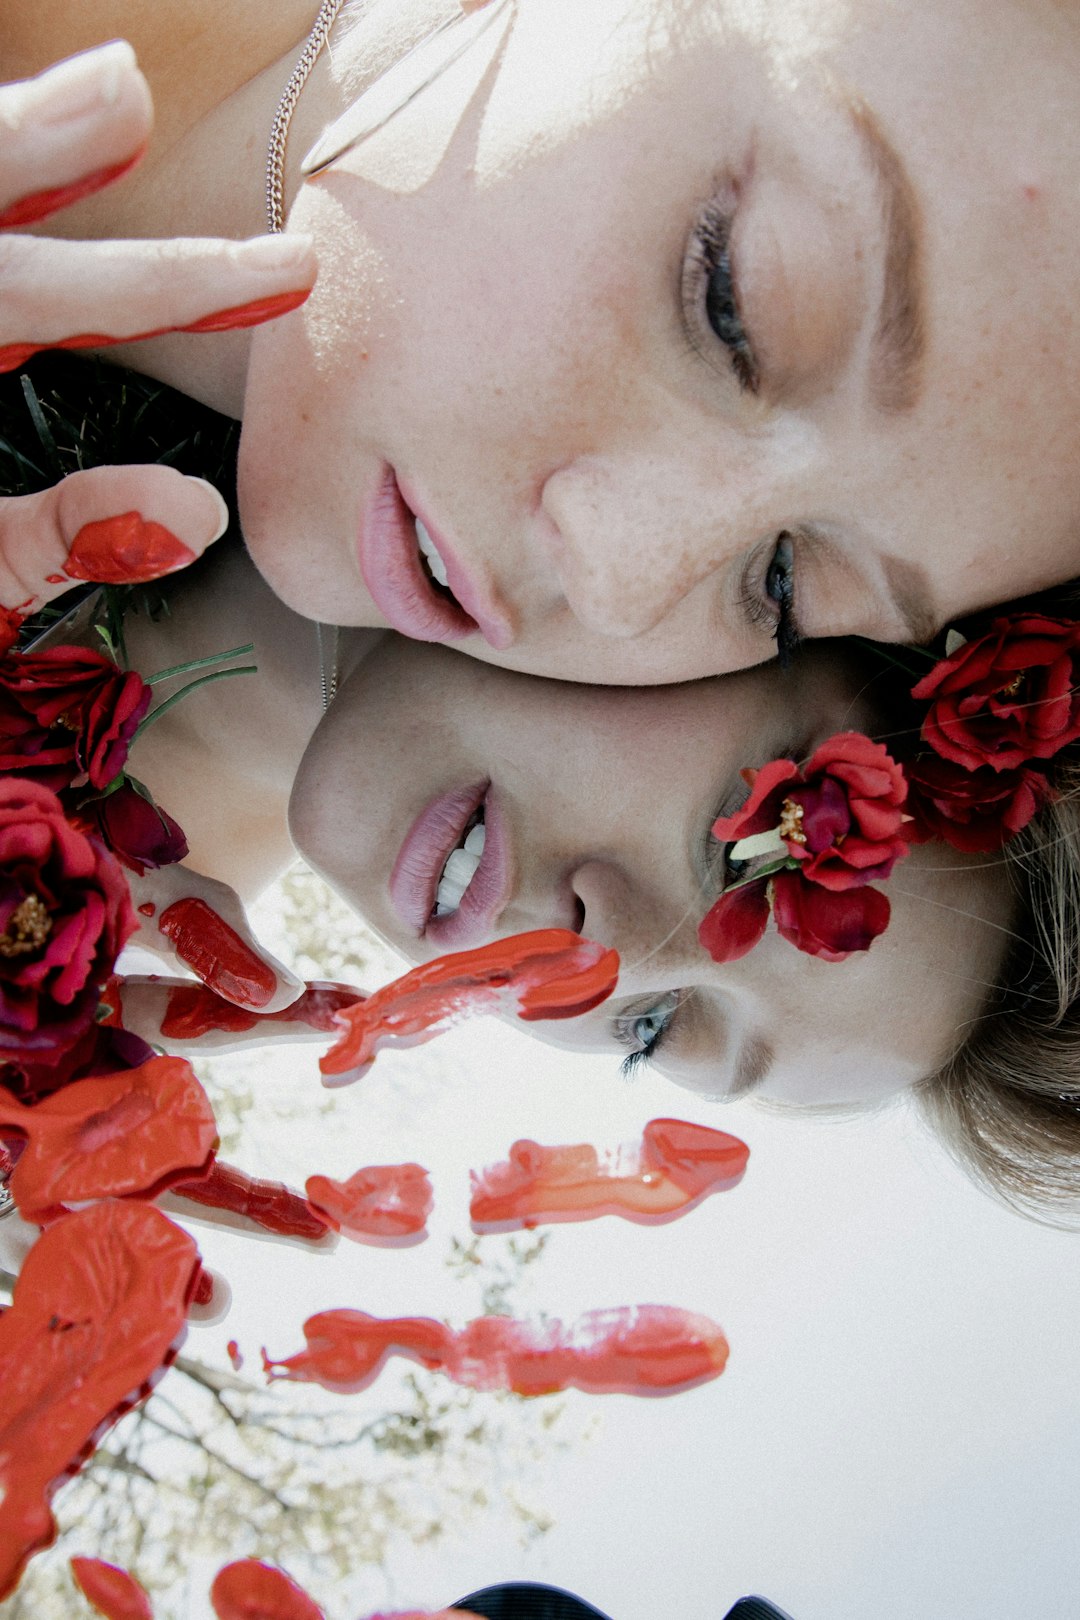 woman with red petals on her face